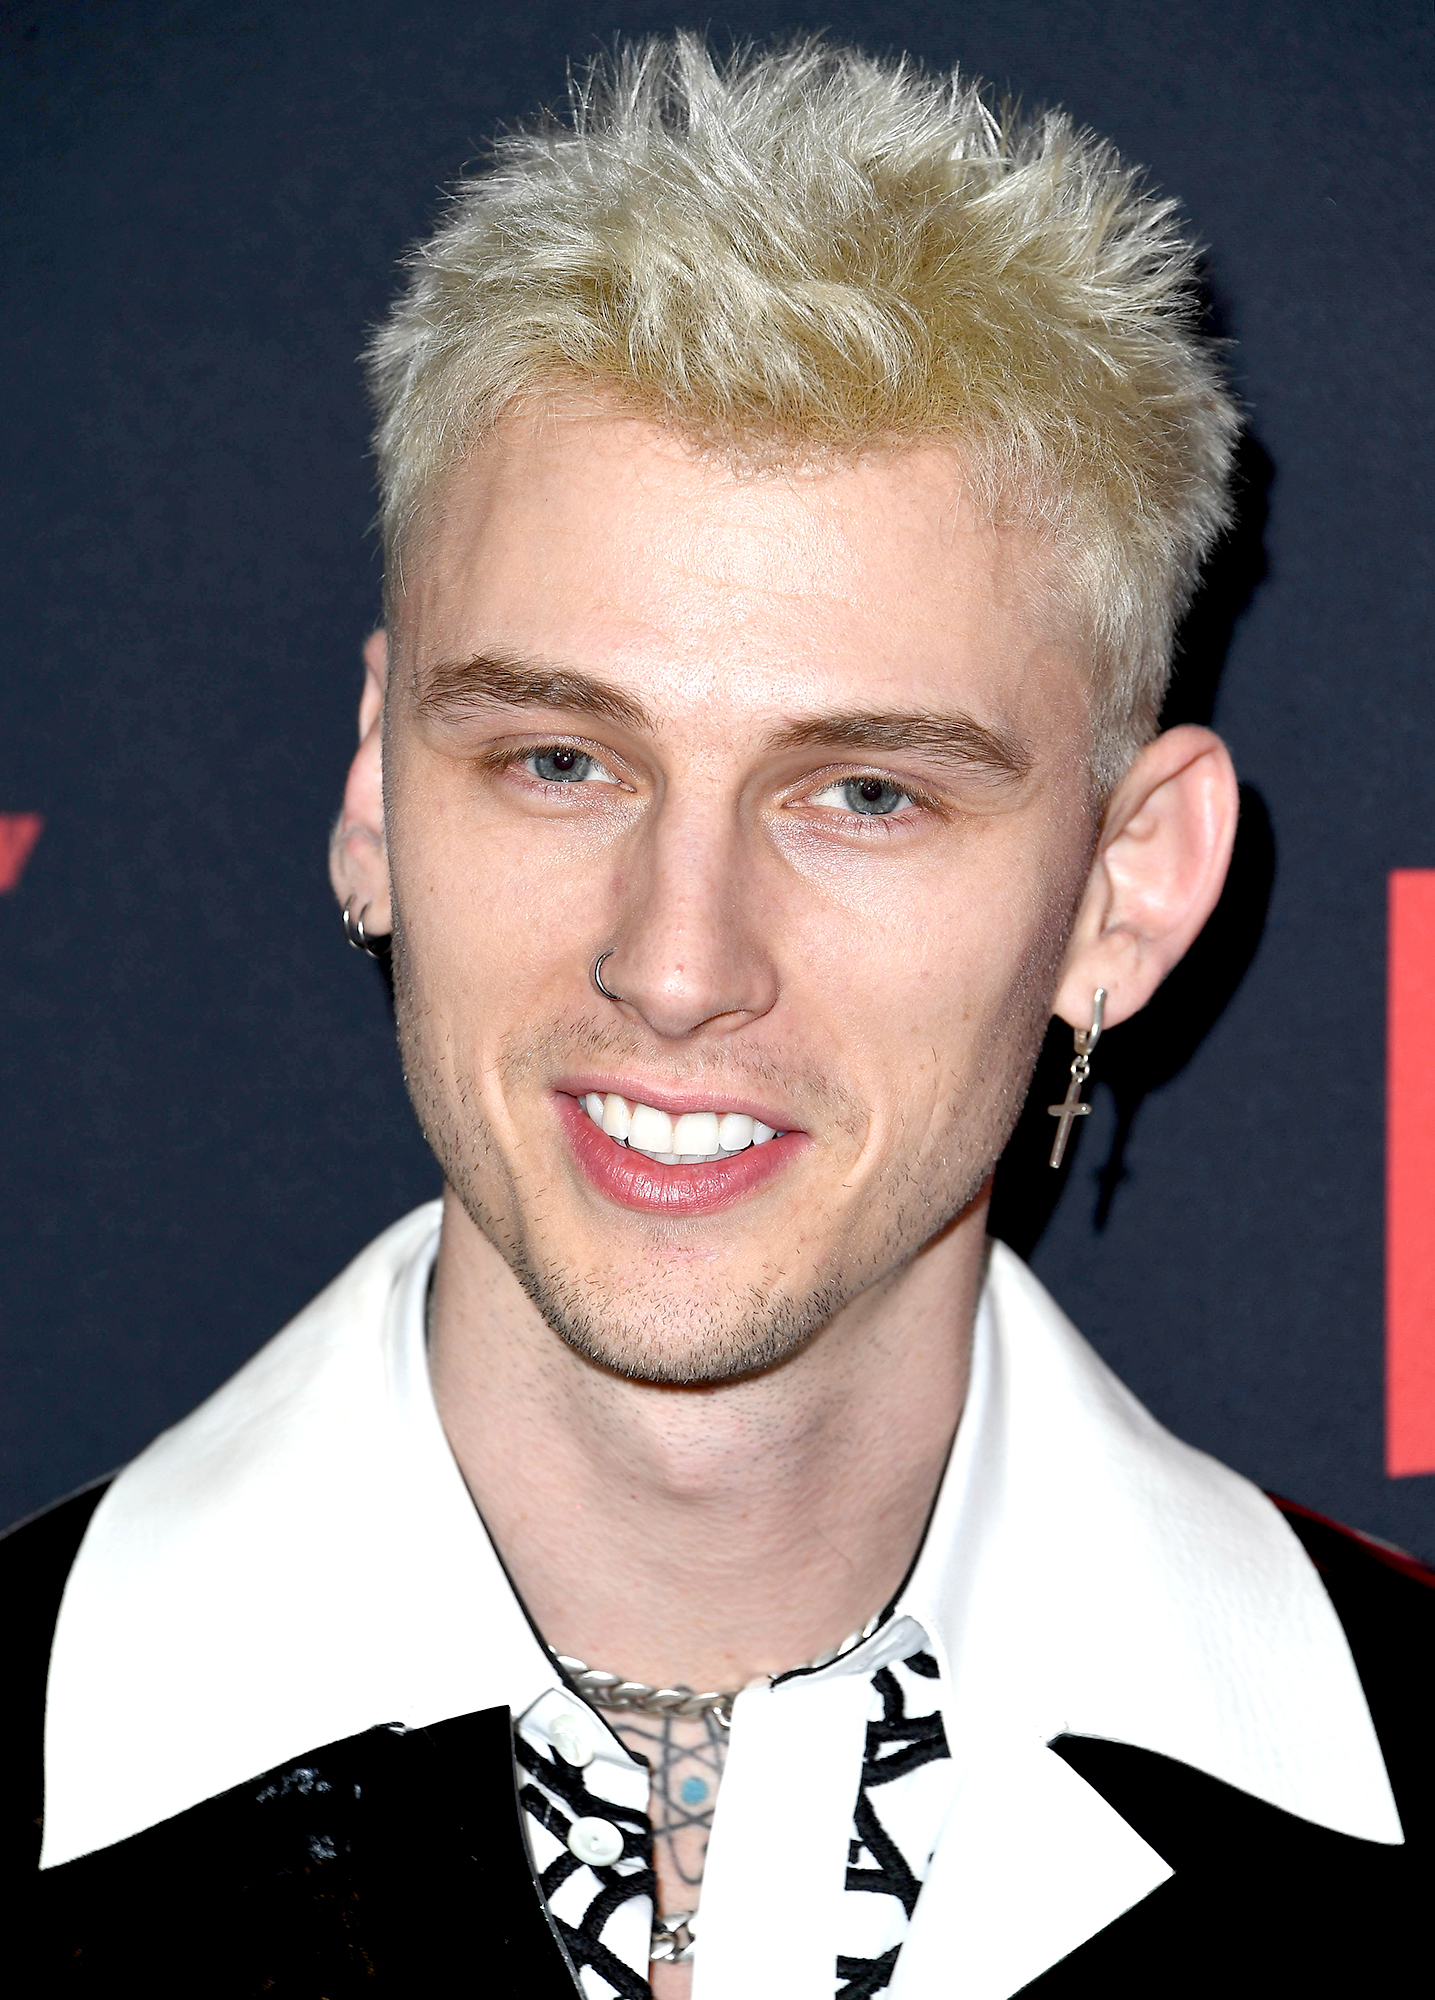 Machine Gun Kelly: 25 Things You Don't Know About Me